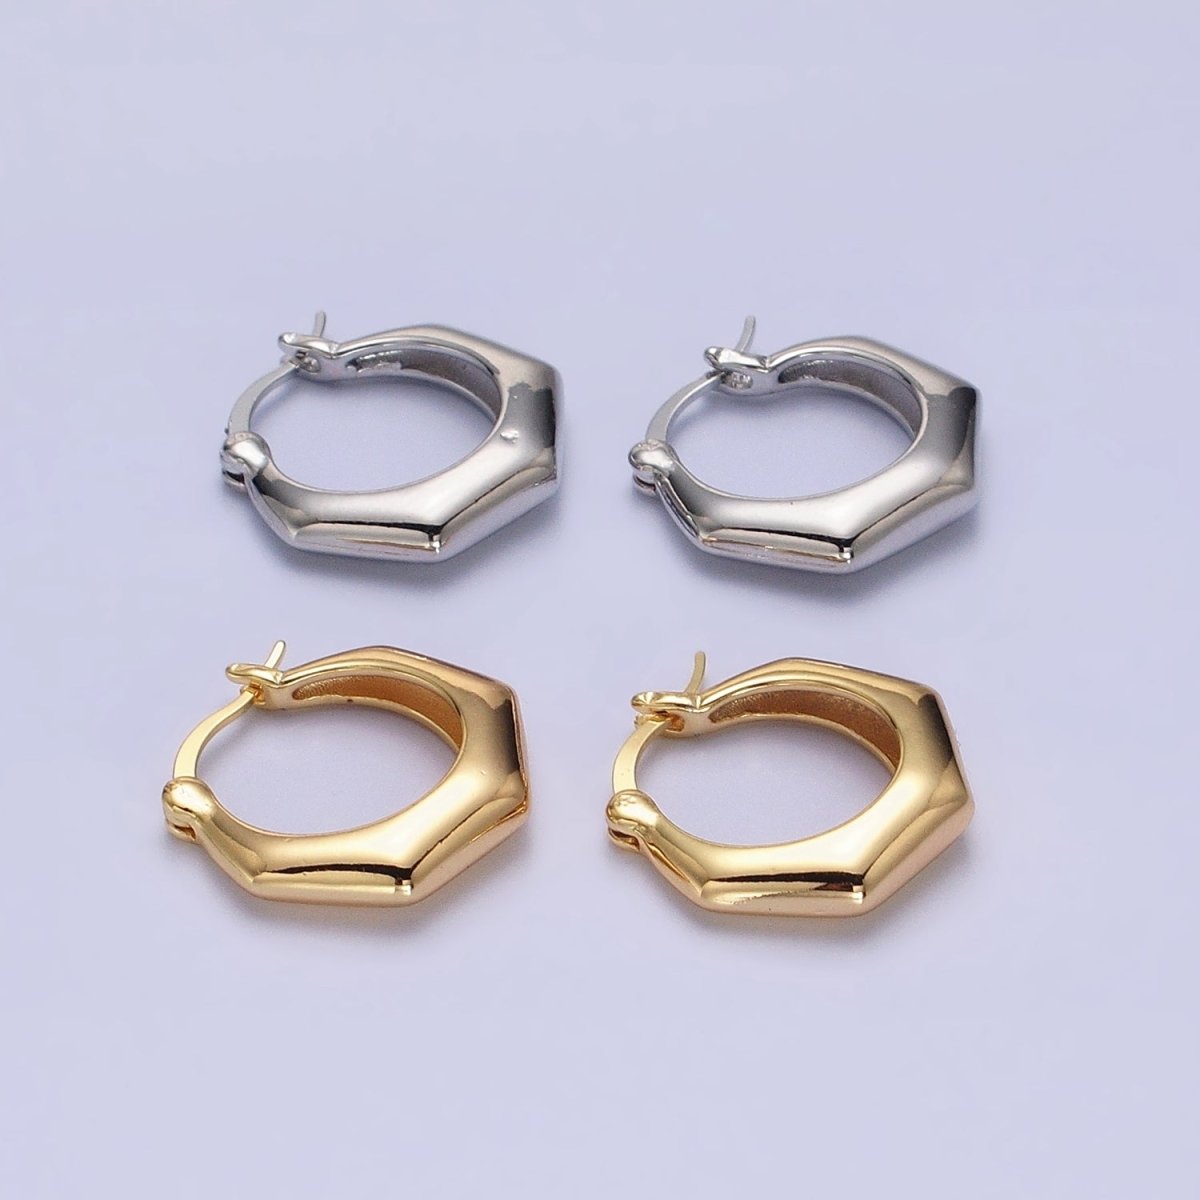 16K Gold Filled 20mm Hexagonal Dome French Lock Latch Earrings in Gold & Silver | AB1472 AB1473 - DLUXCA